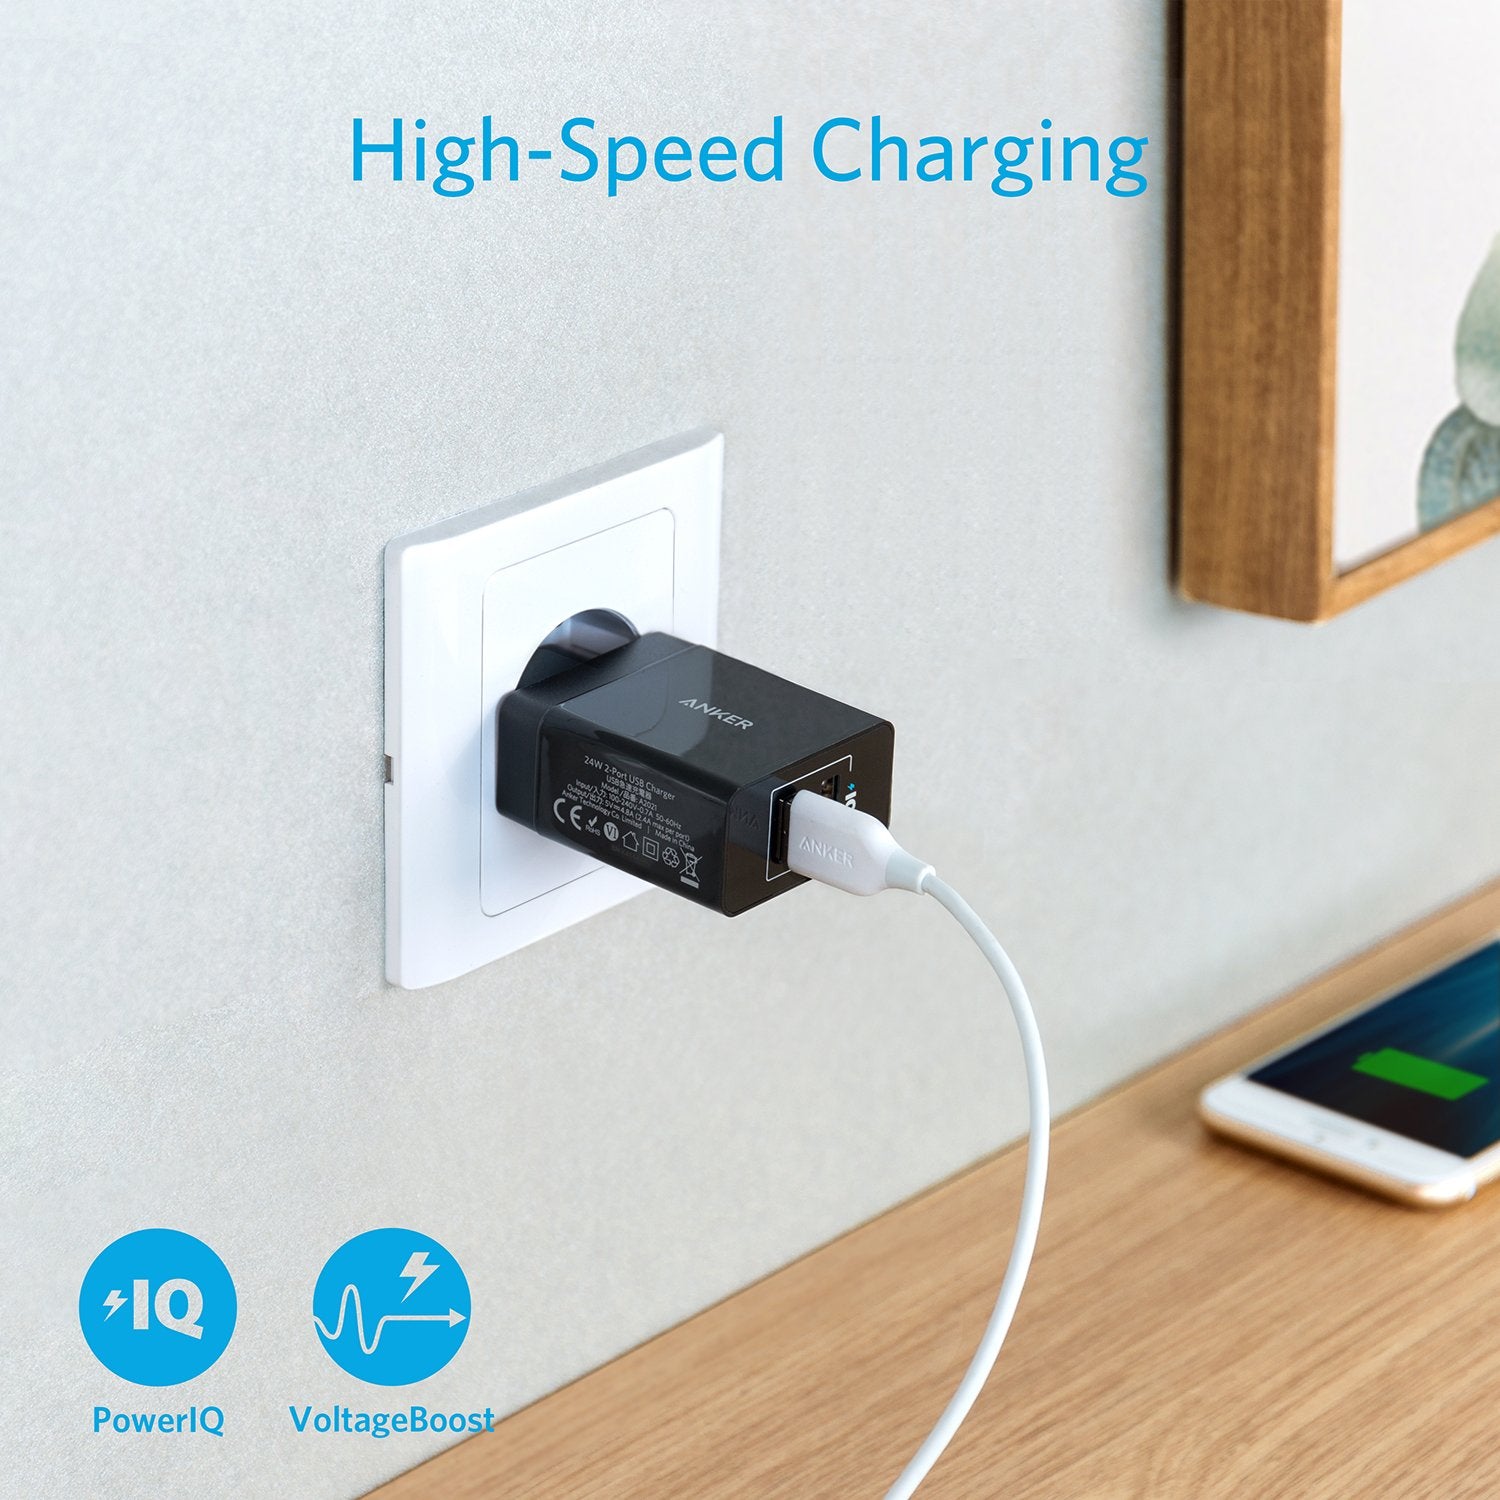 Anker Tech Anker 24W Dual-Port USB Wall Charger schwarz - Angebote ab 15,99  €